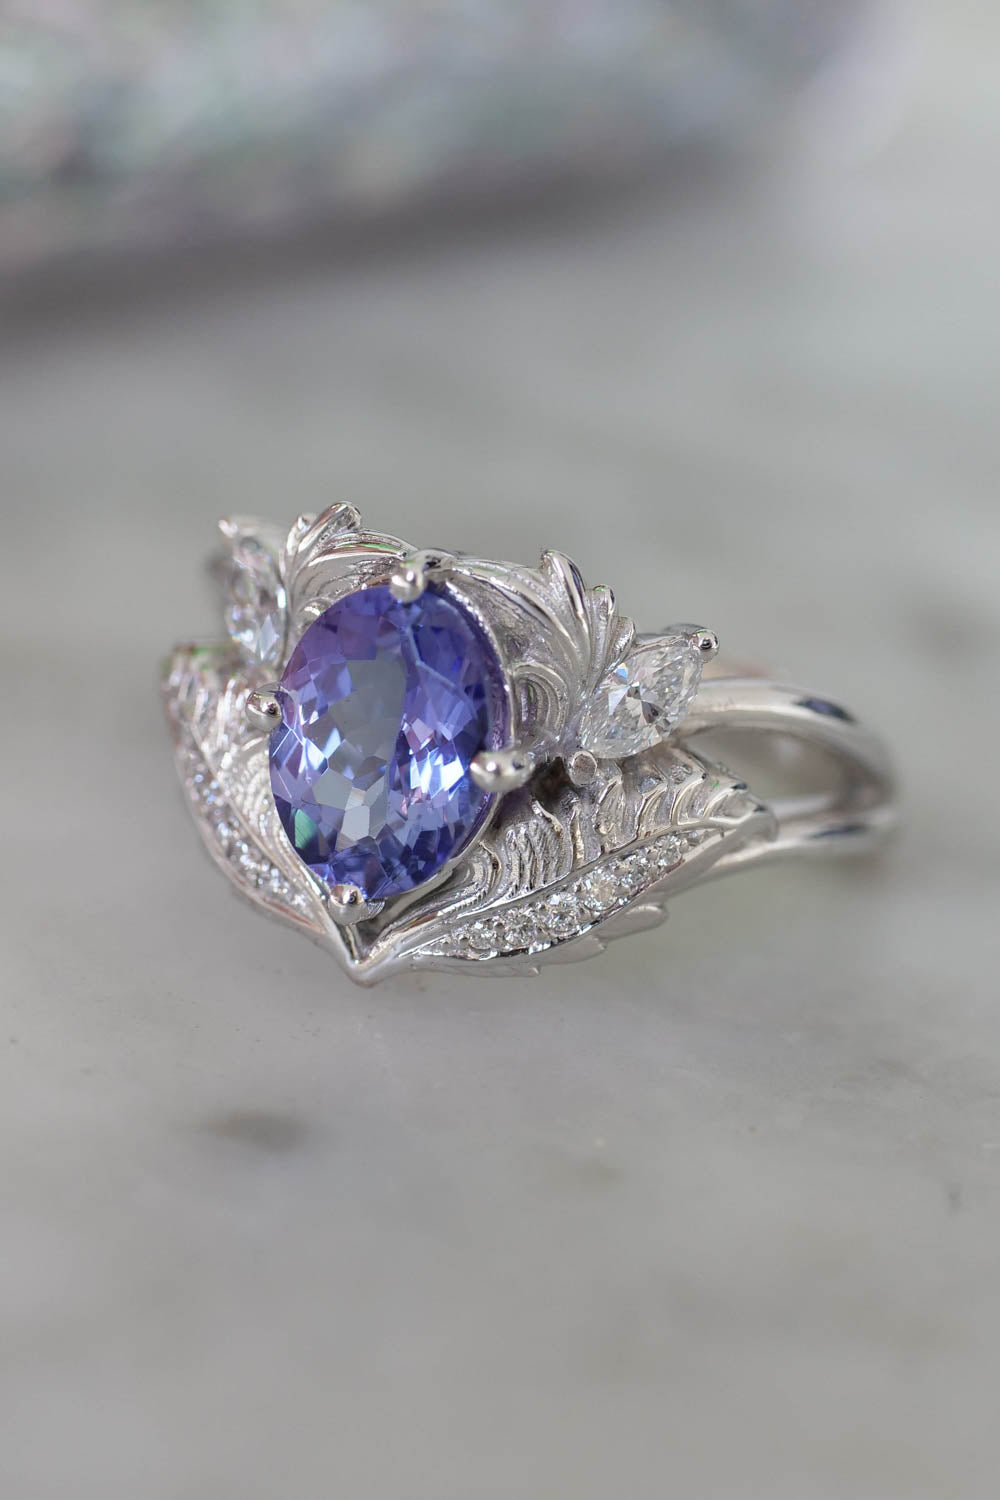 READY TO SHIP: Adonis in 14K white gold, natural tanzanite 8x6 mm, diamonds, RING SIZE 7 US - Eden Garden Jewelry™